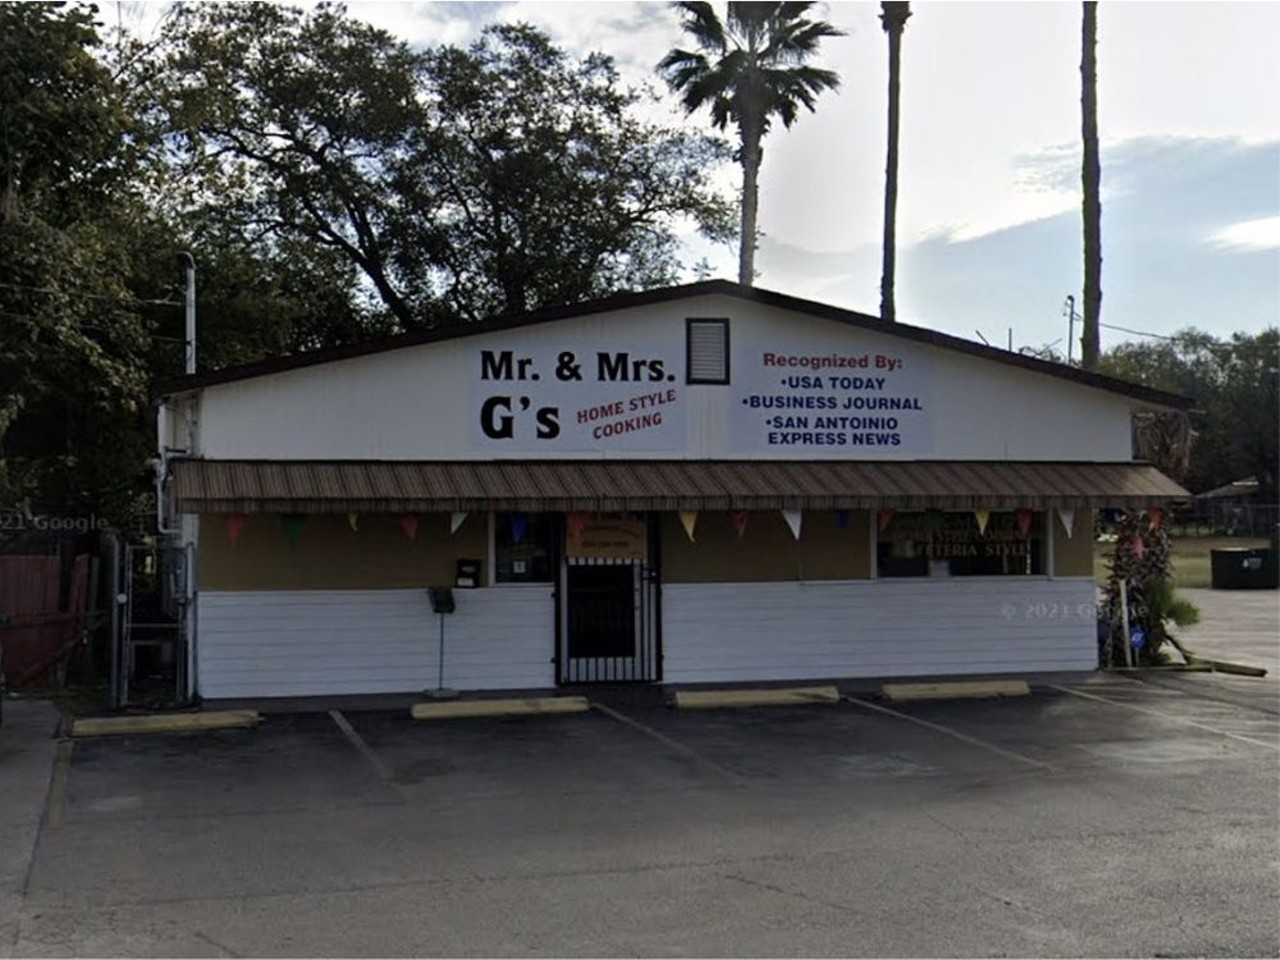 Mr. and Mrs. G’s Home Cooking
2222 S. W.W. White Rd.
William Garner and his wife Addie opened this spot in 1991, focusing on family recipes and old-fashioned hospitality. It quickly became a staple of the city’s East side and remained open for more than three decades before closing in July of 2022.